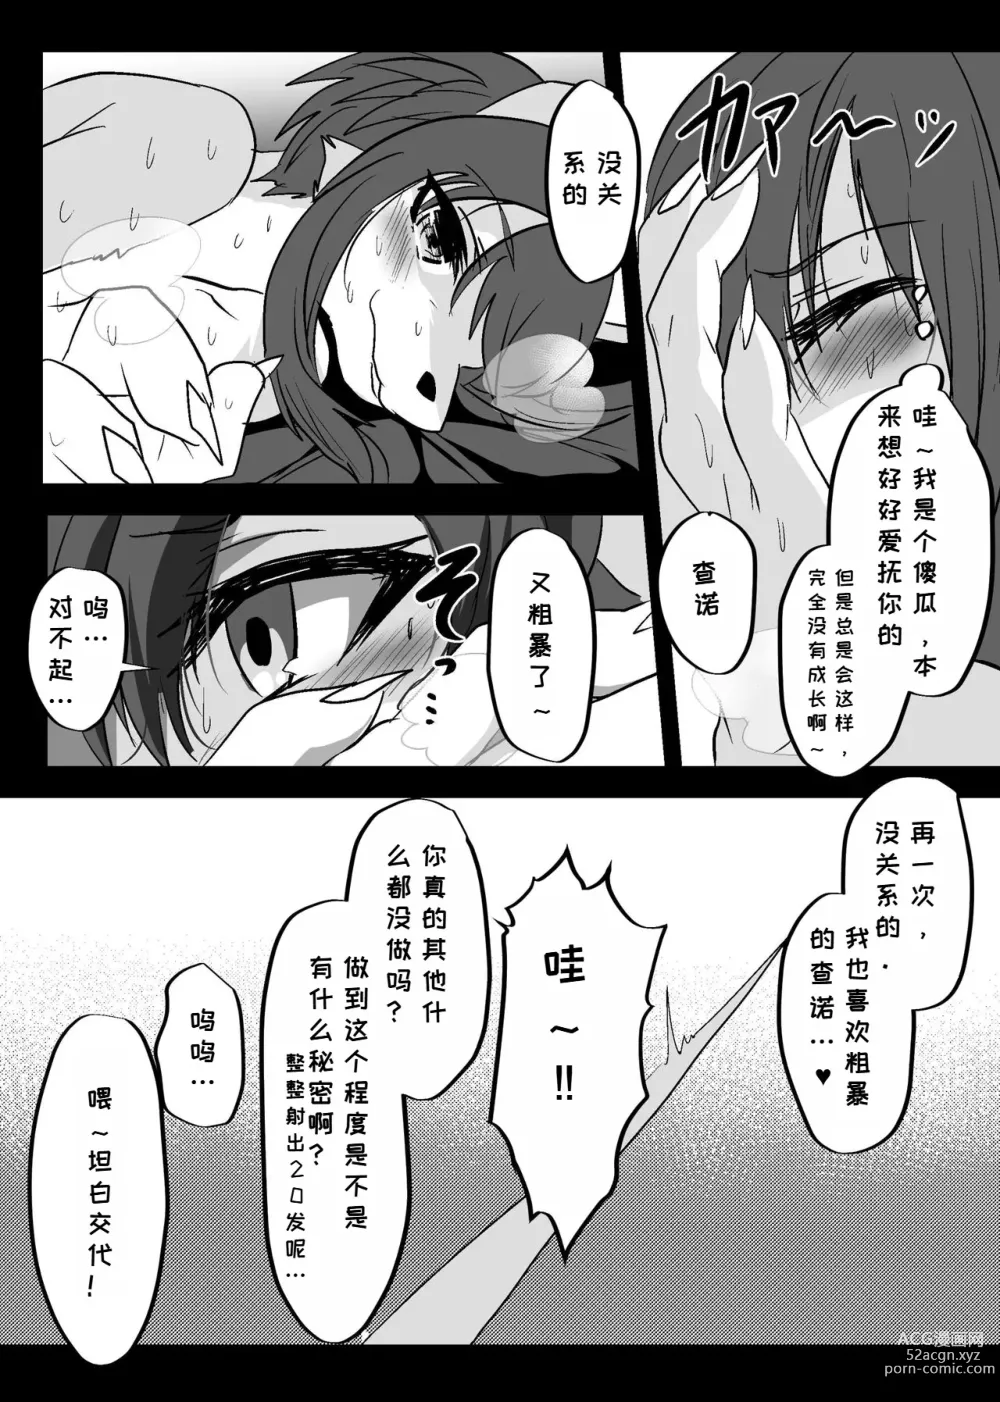 Page 58 of doujinshi 我们发情出勤科 2